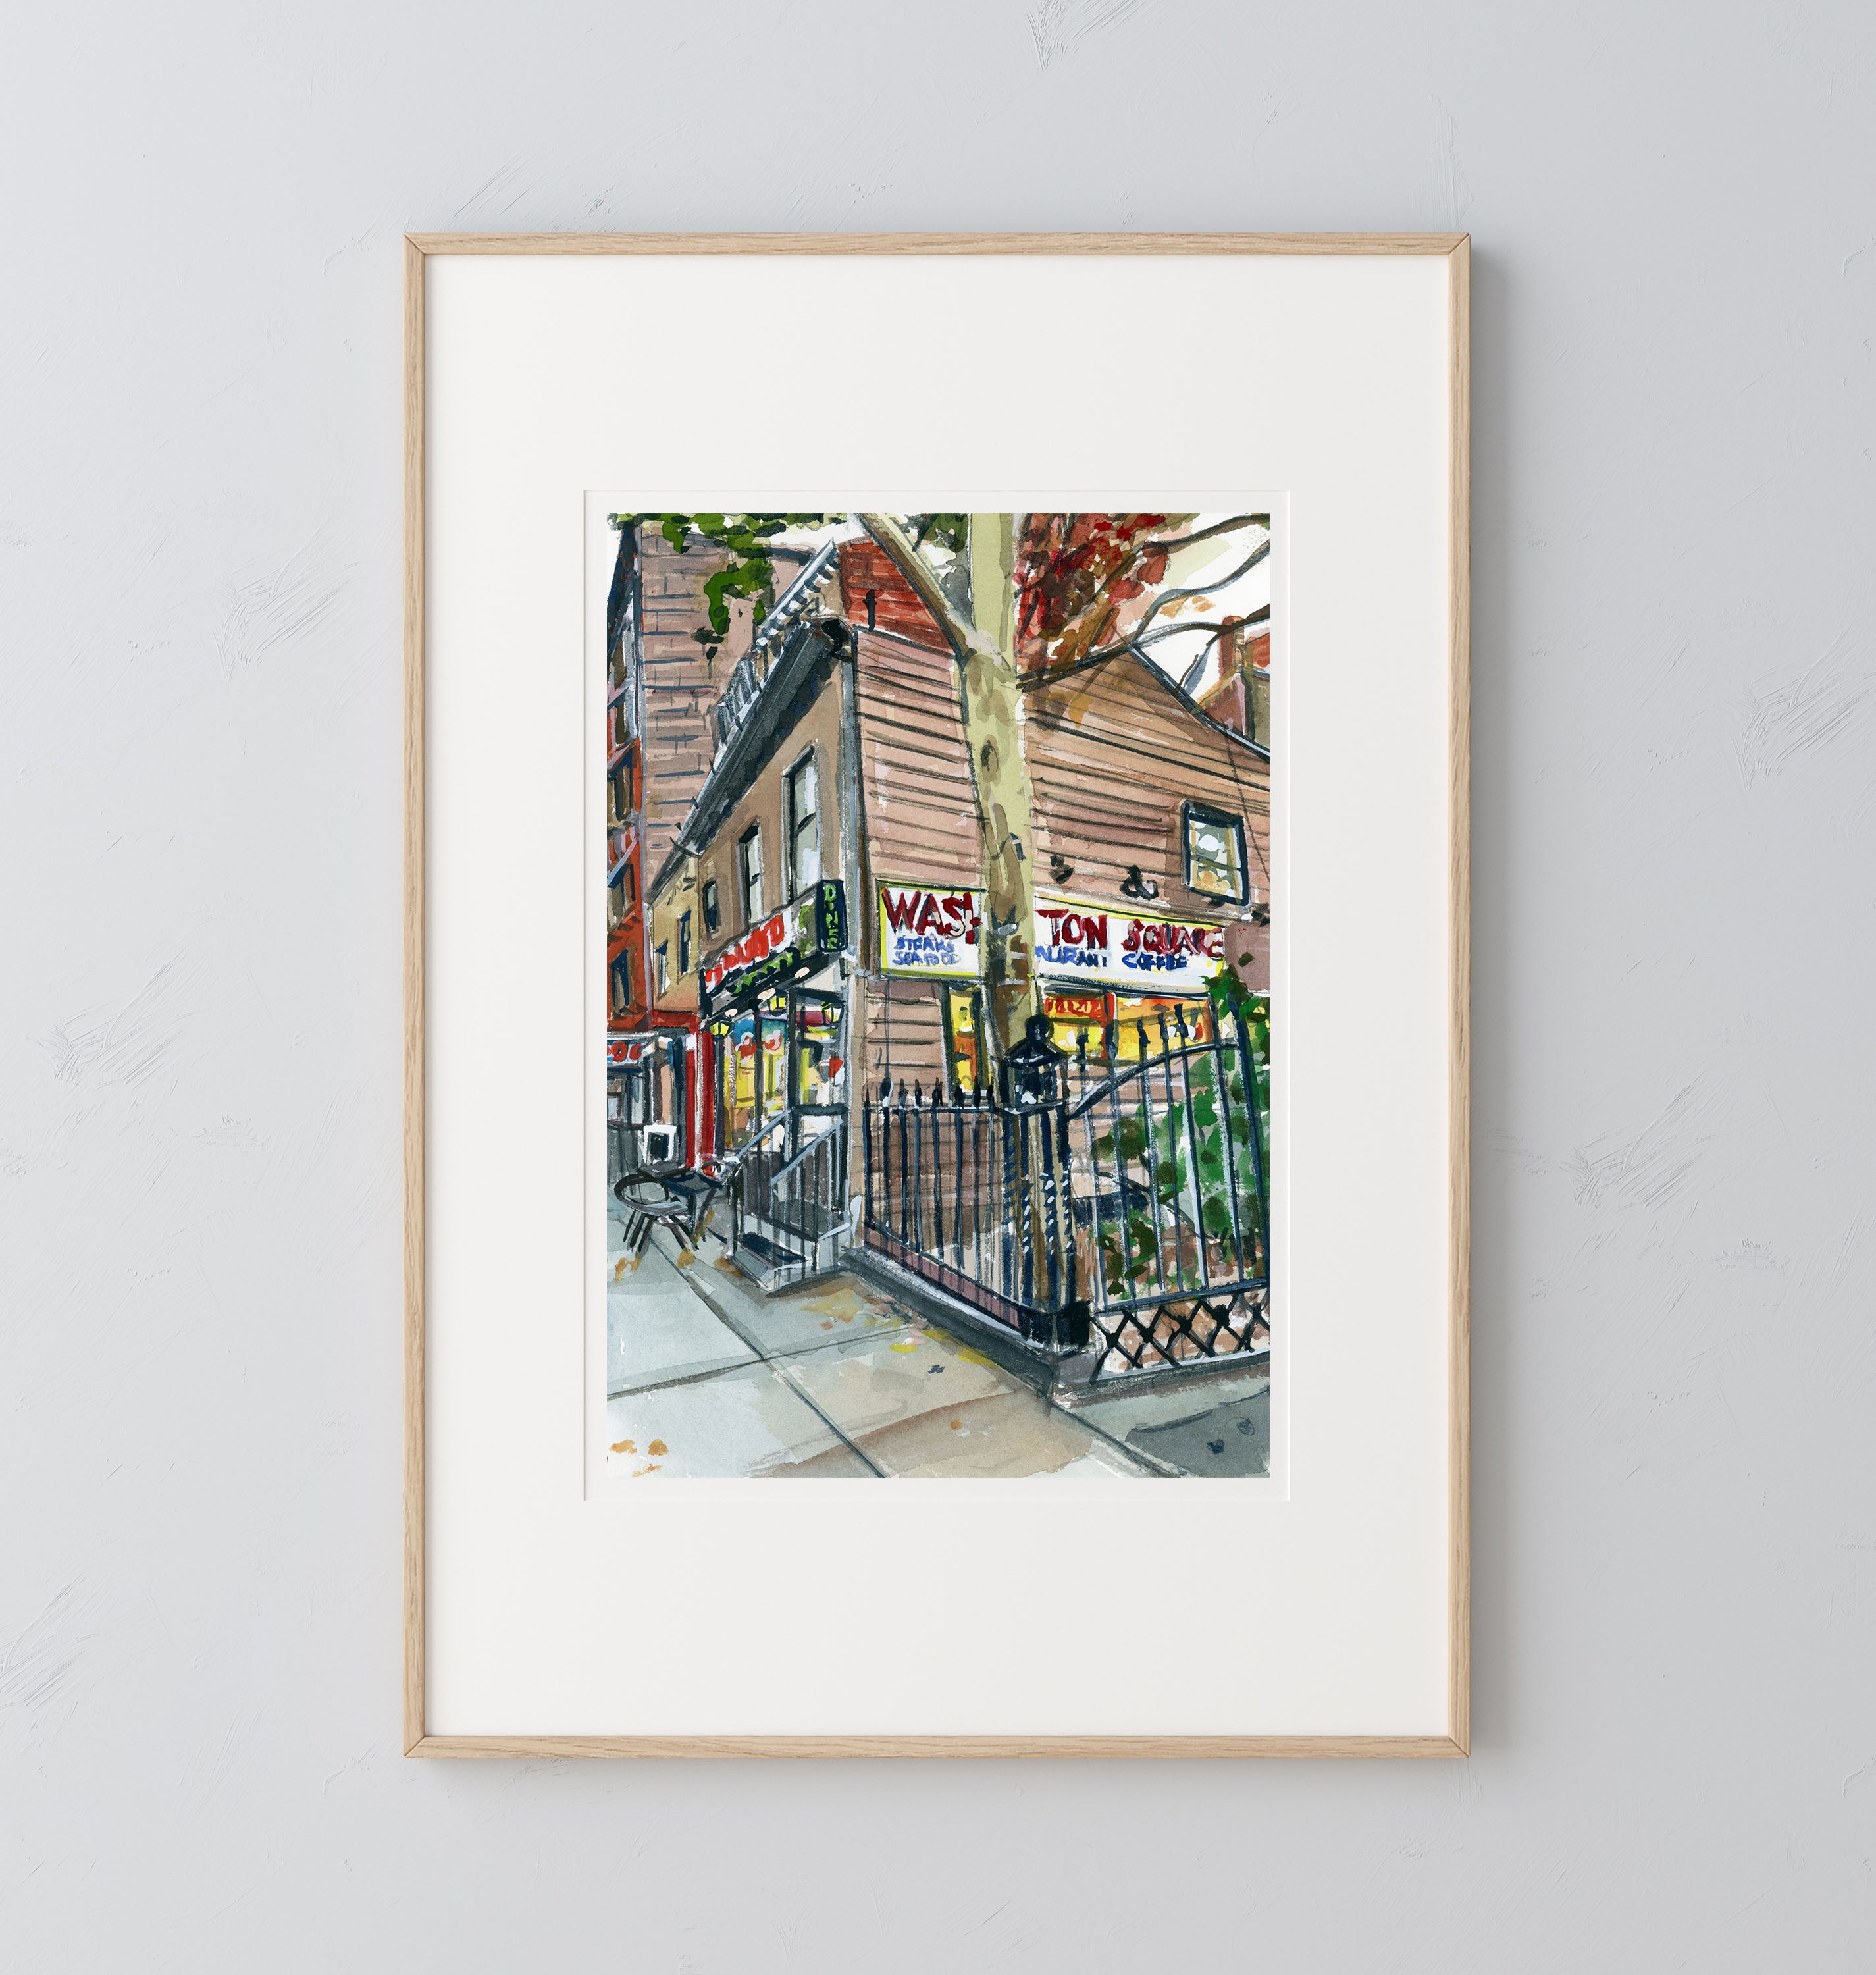 Washington Square print of painting by Medjool Studio. Print of original gouache painting capturing the scene of a corner store using vibrant colors and dynamic composition.